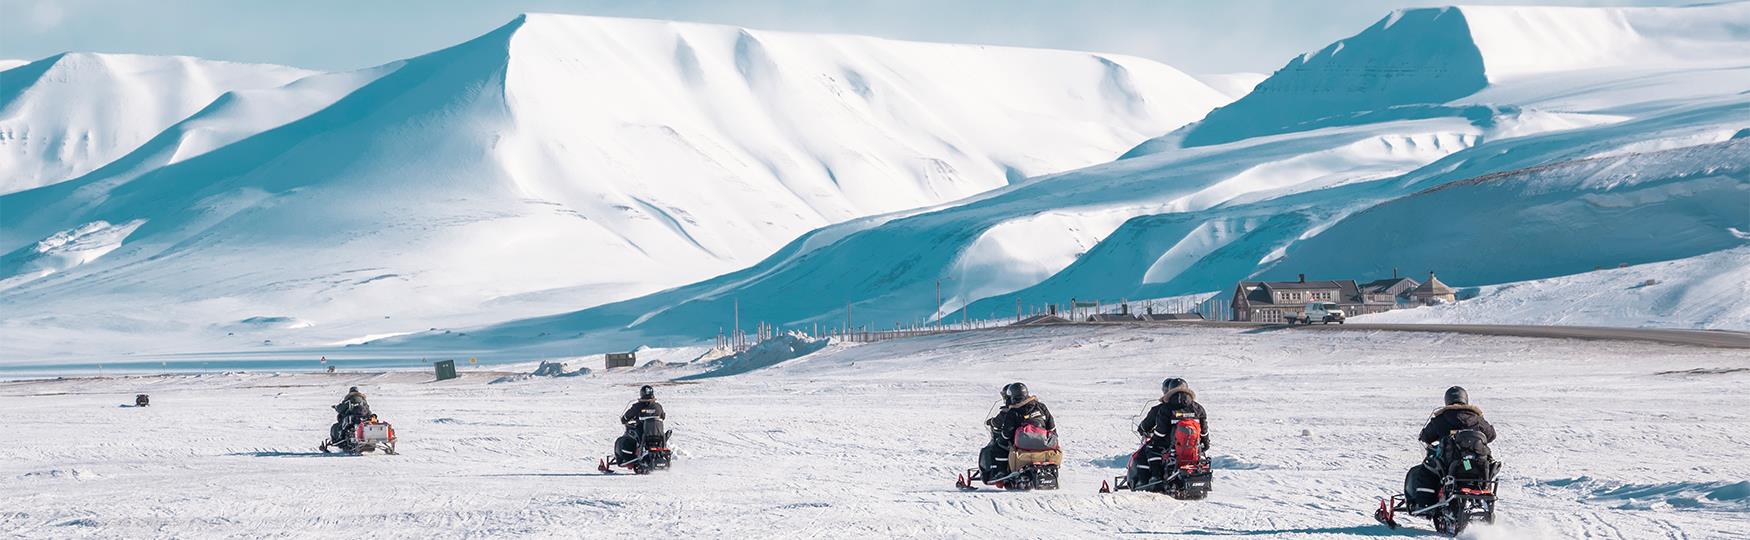 A guided group on snowmobiles driving through a snowy landscape